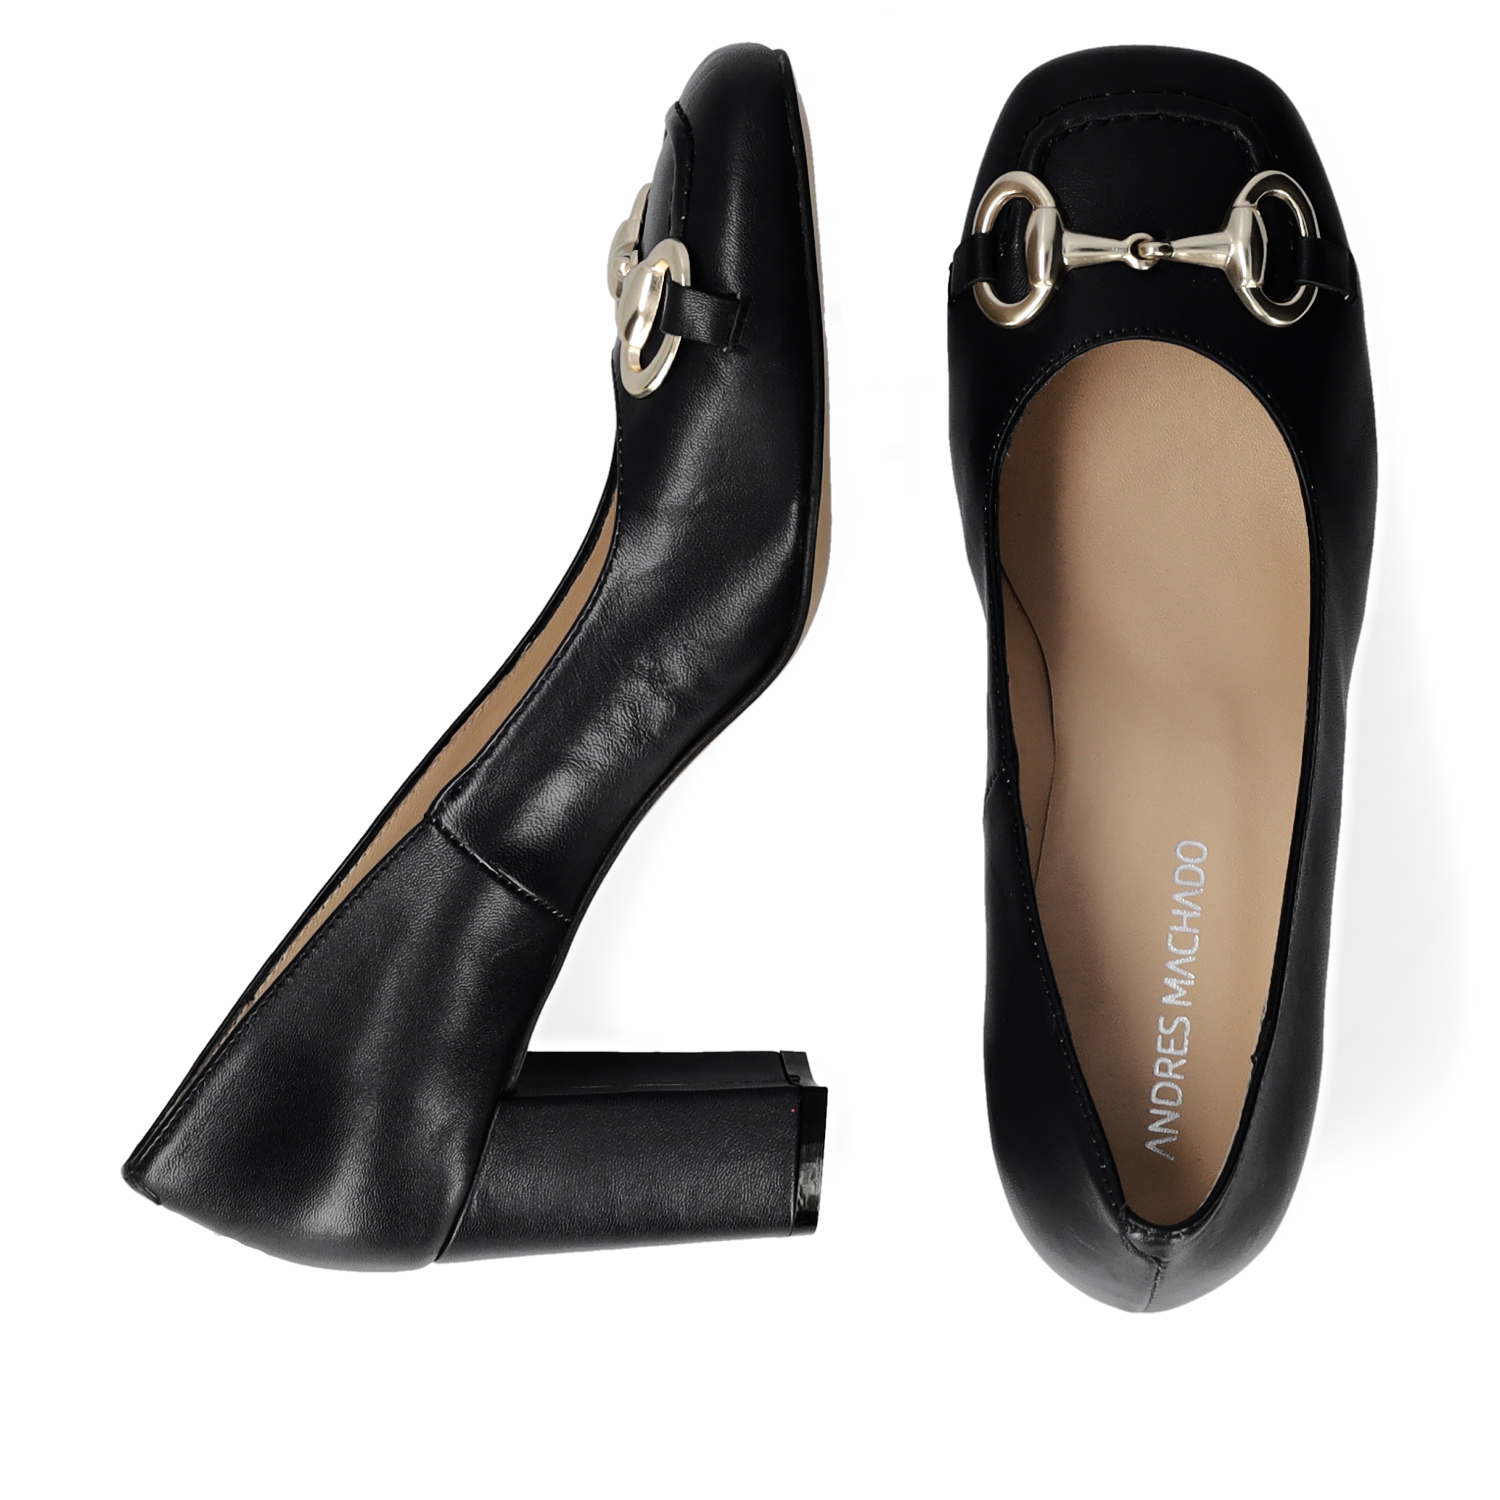 Vintage style heeled shoes in black leather 